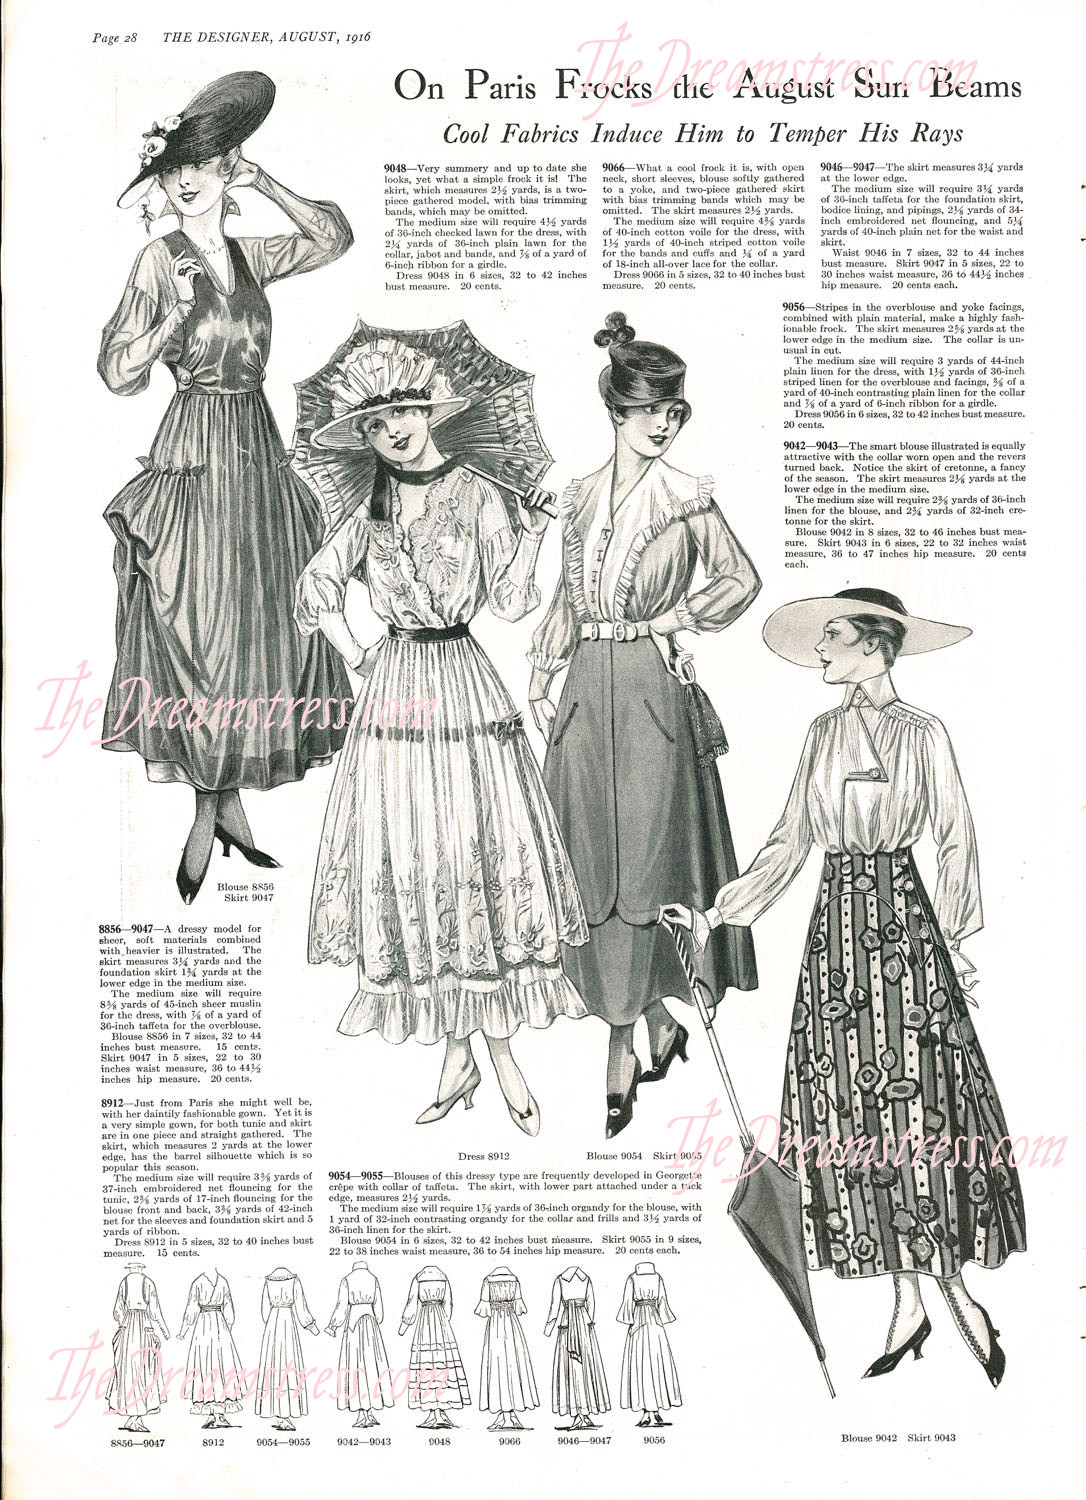 The Designer, August 1916 thedreamstress.com